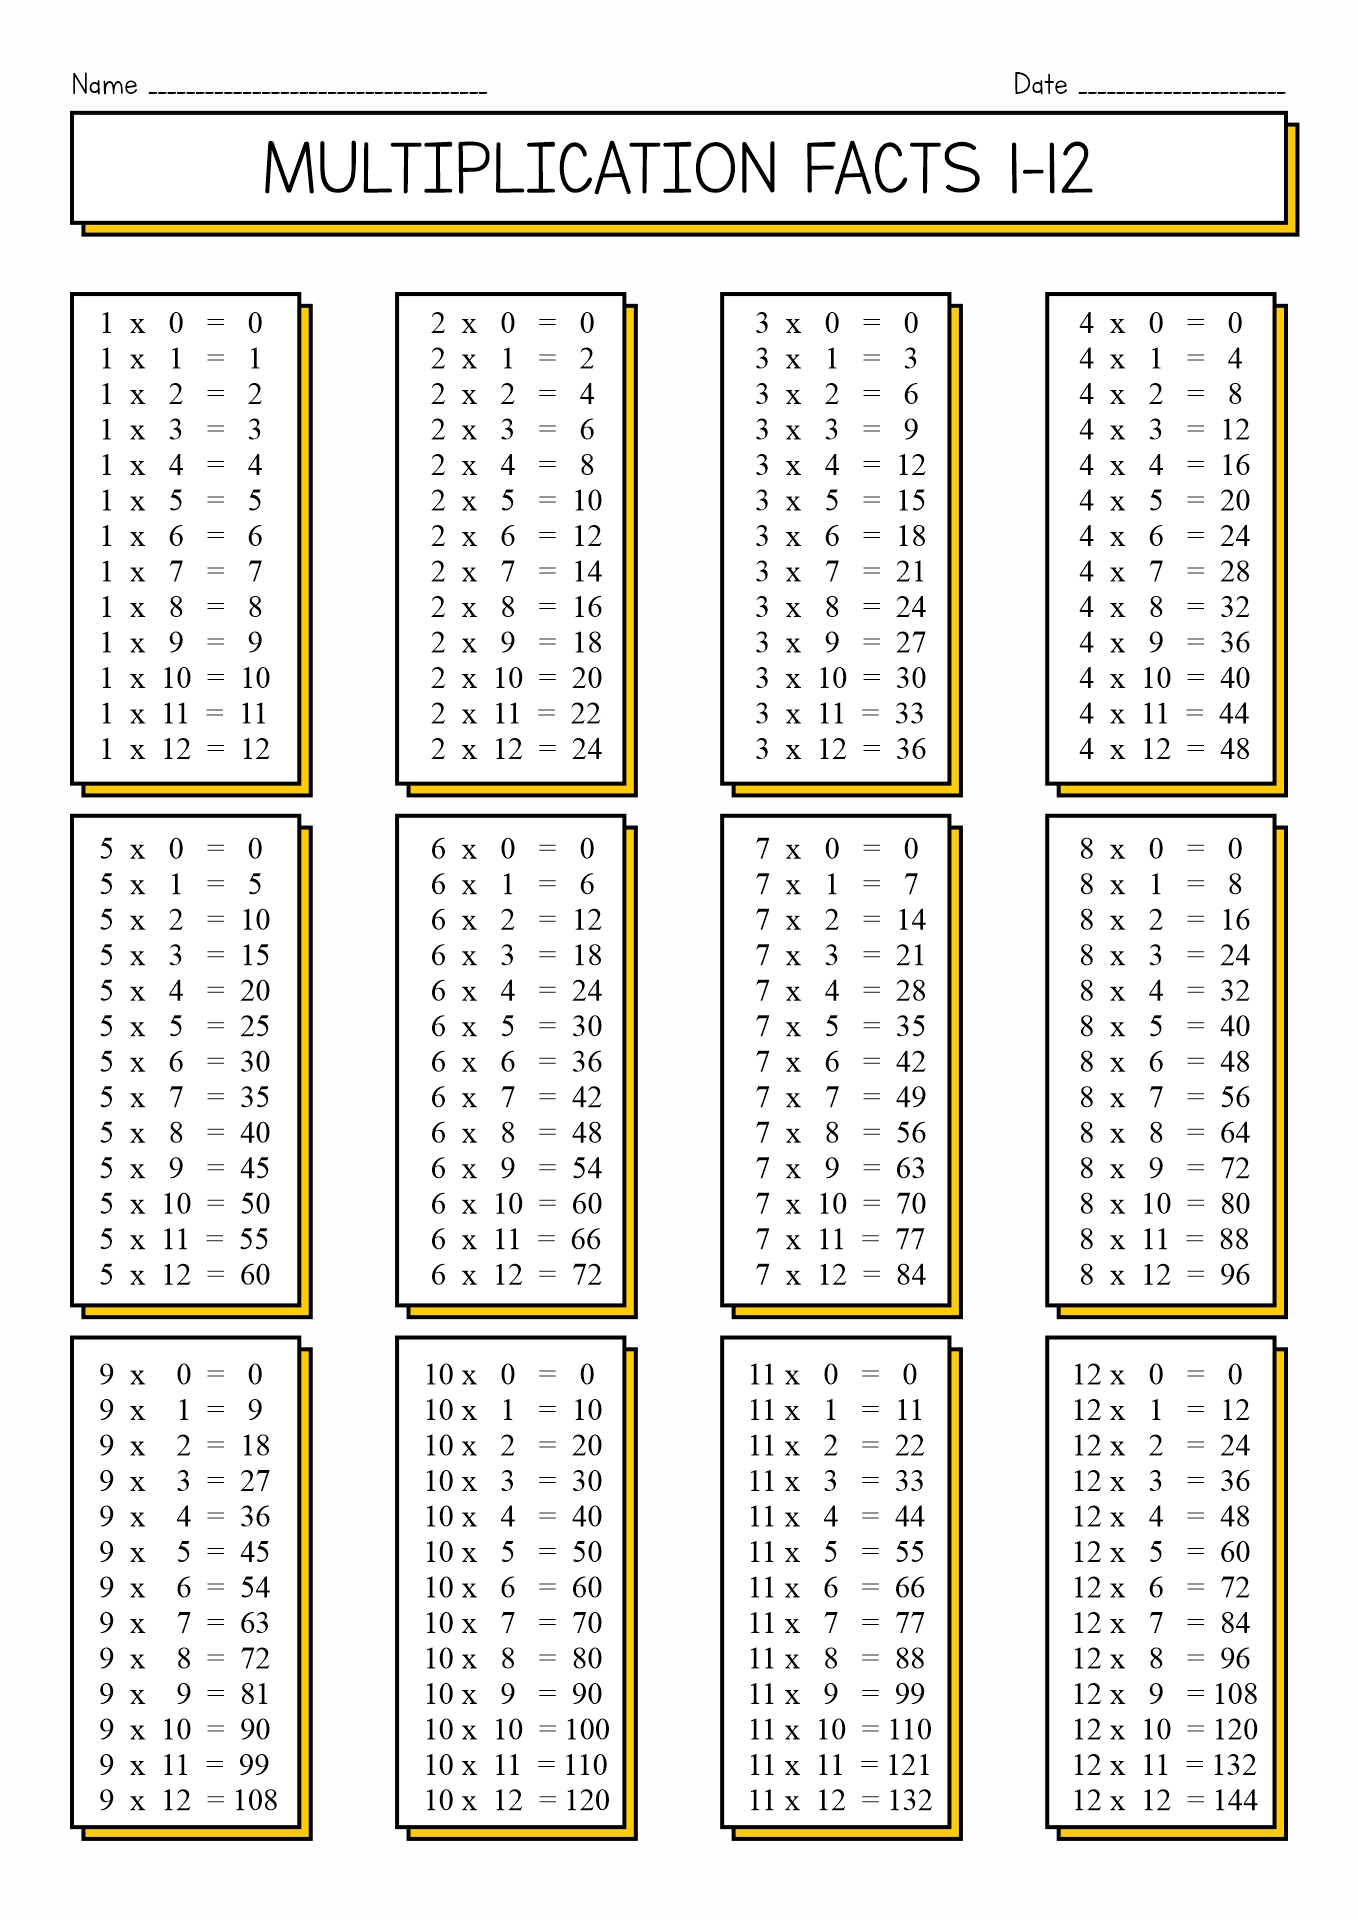 Multiplication Facts 1 12 Printable Image